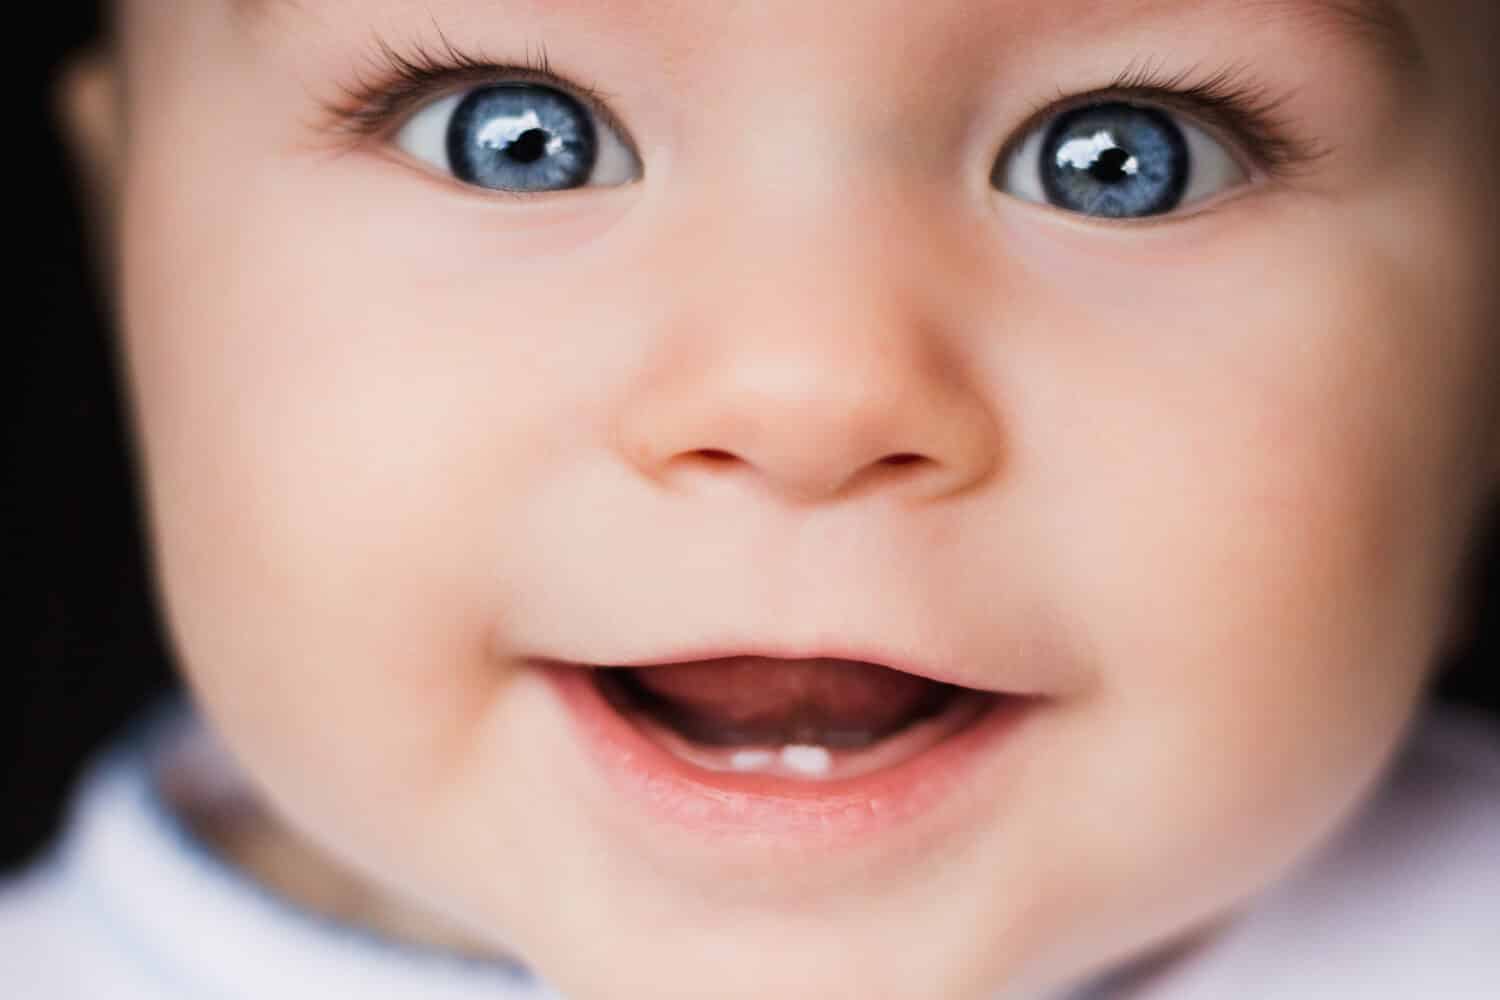 Baby portrait. Closeup face with bright blue eyes. Babies, eyes, ophthalmology, curiosity, happiness, explore the world, joy, childhood, psychology, parenthood, portrait concepts